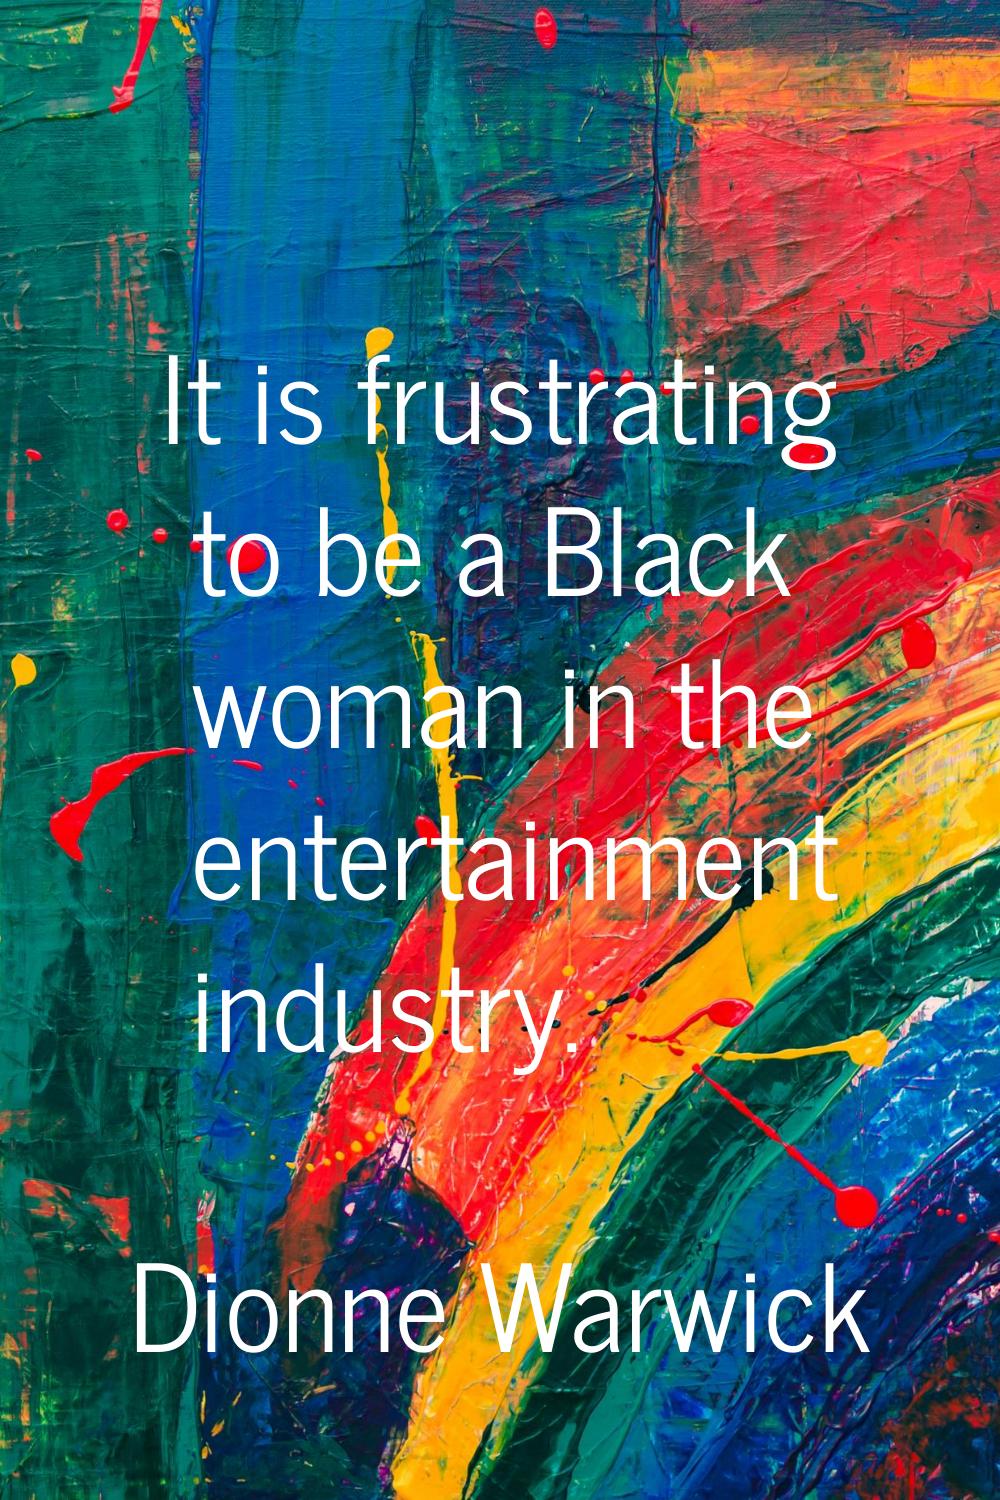 It is frustrating to be a Black woman in the entertainment industry.